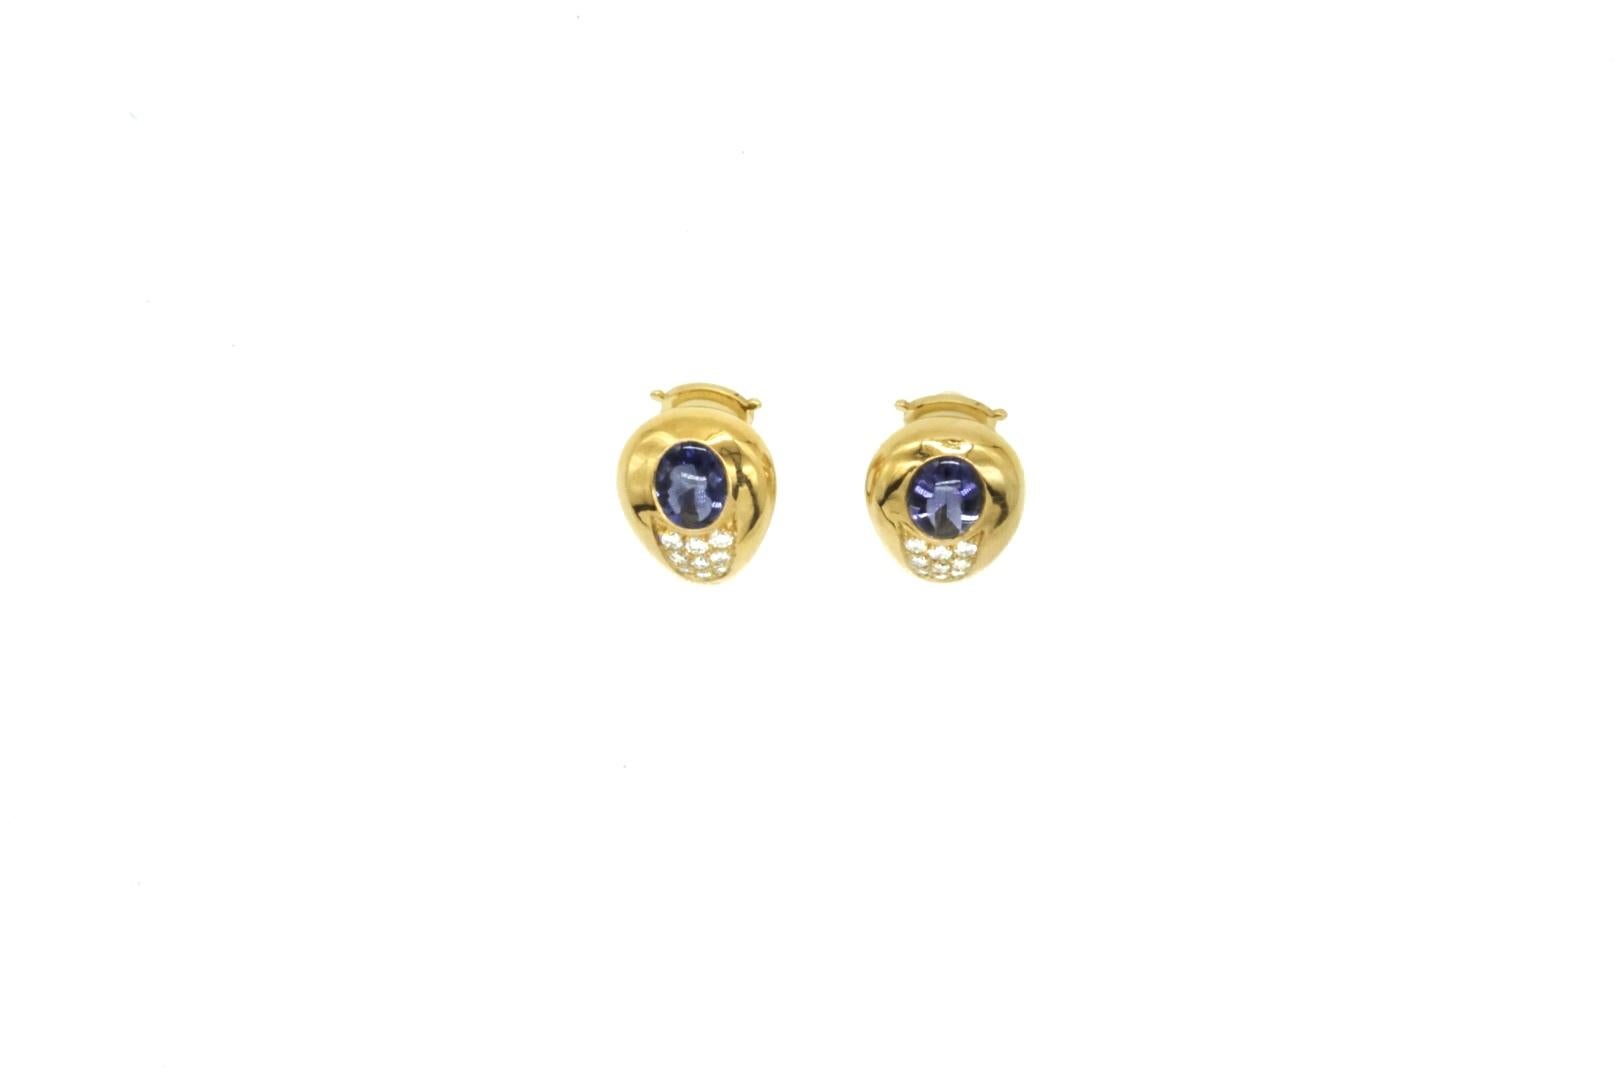 Mauboussin iolite and diamond earclips mounted in 18k yellow gold. Made in France, circa 1970.